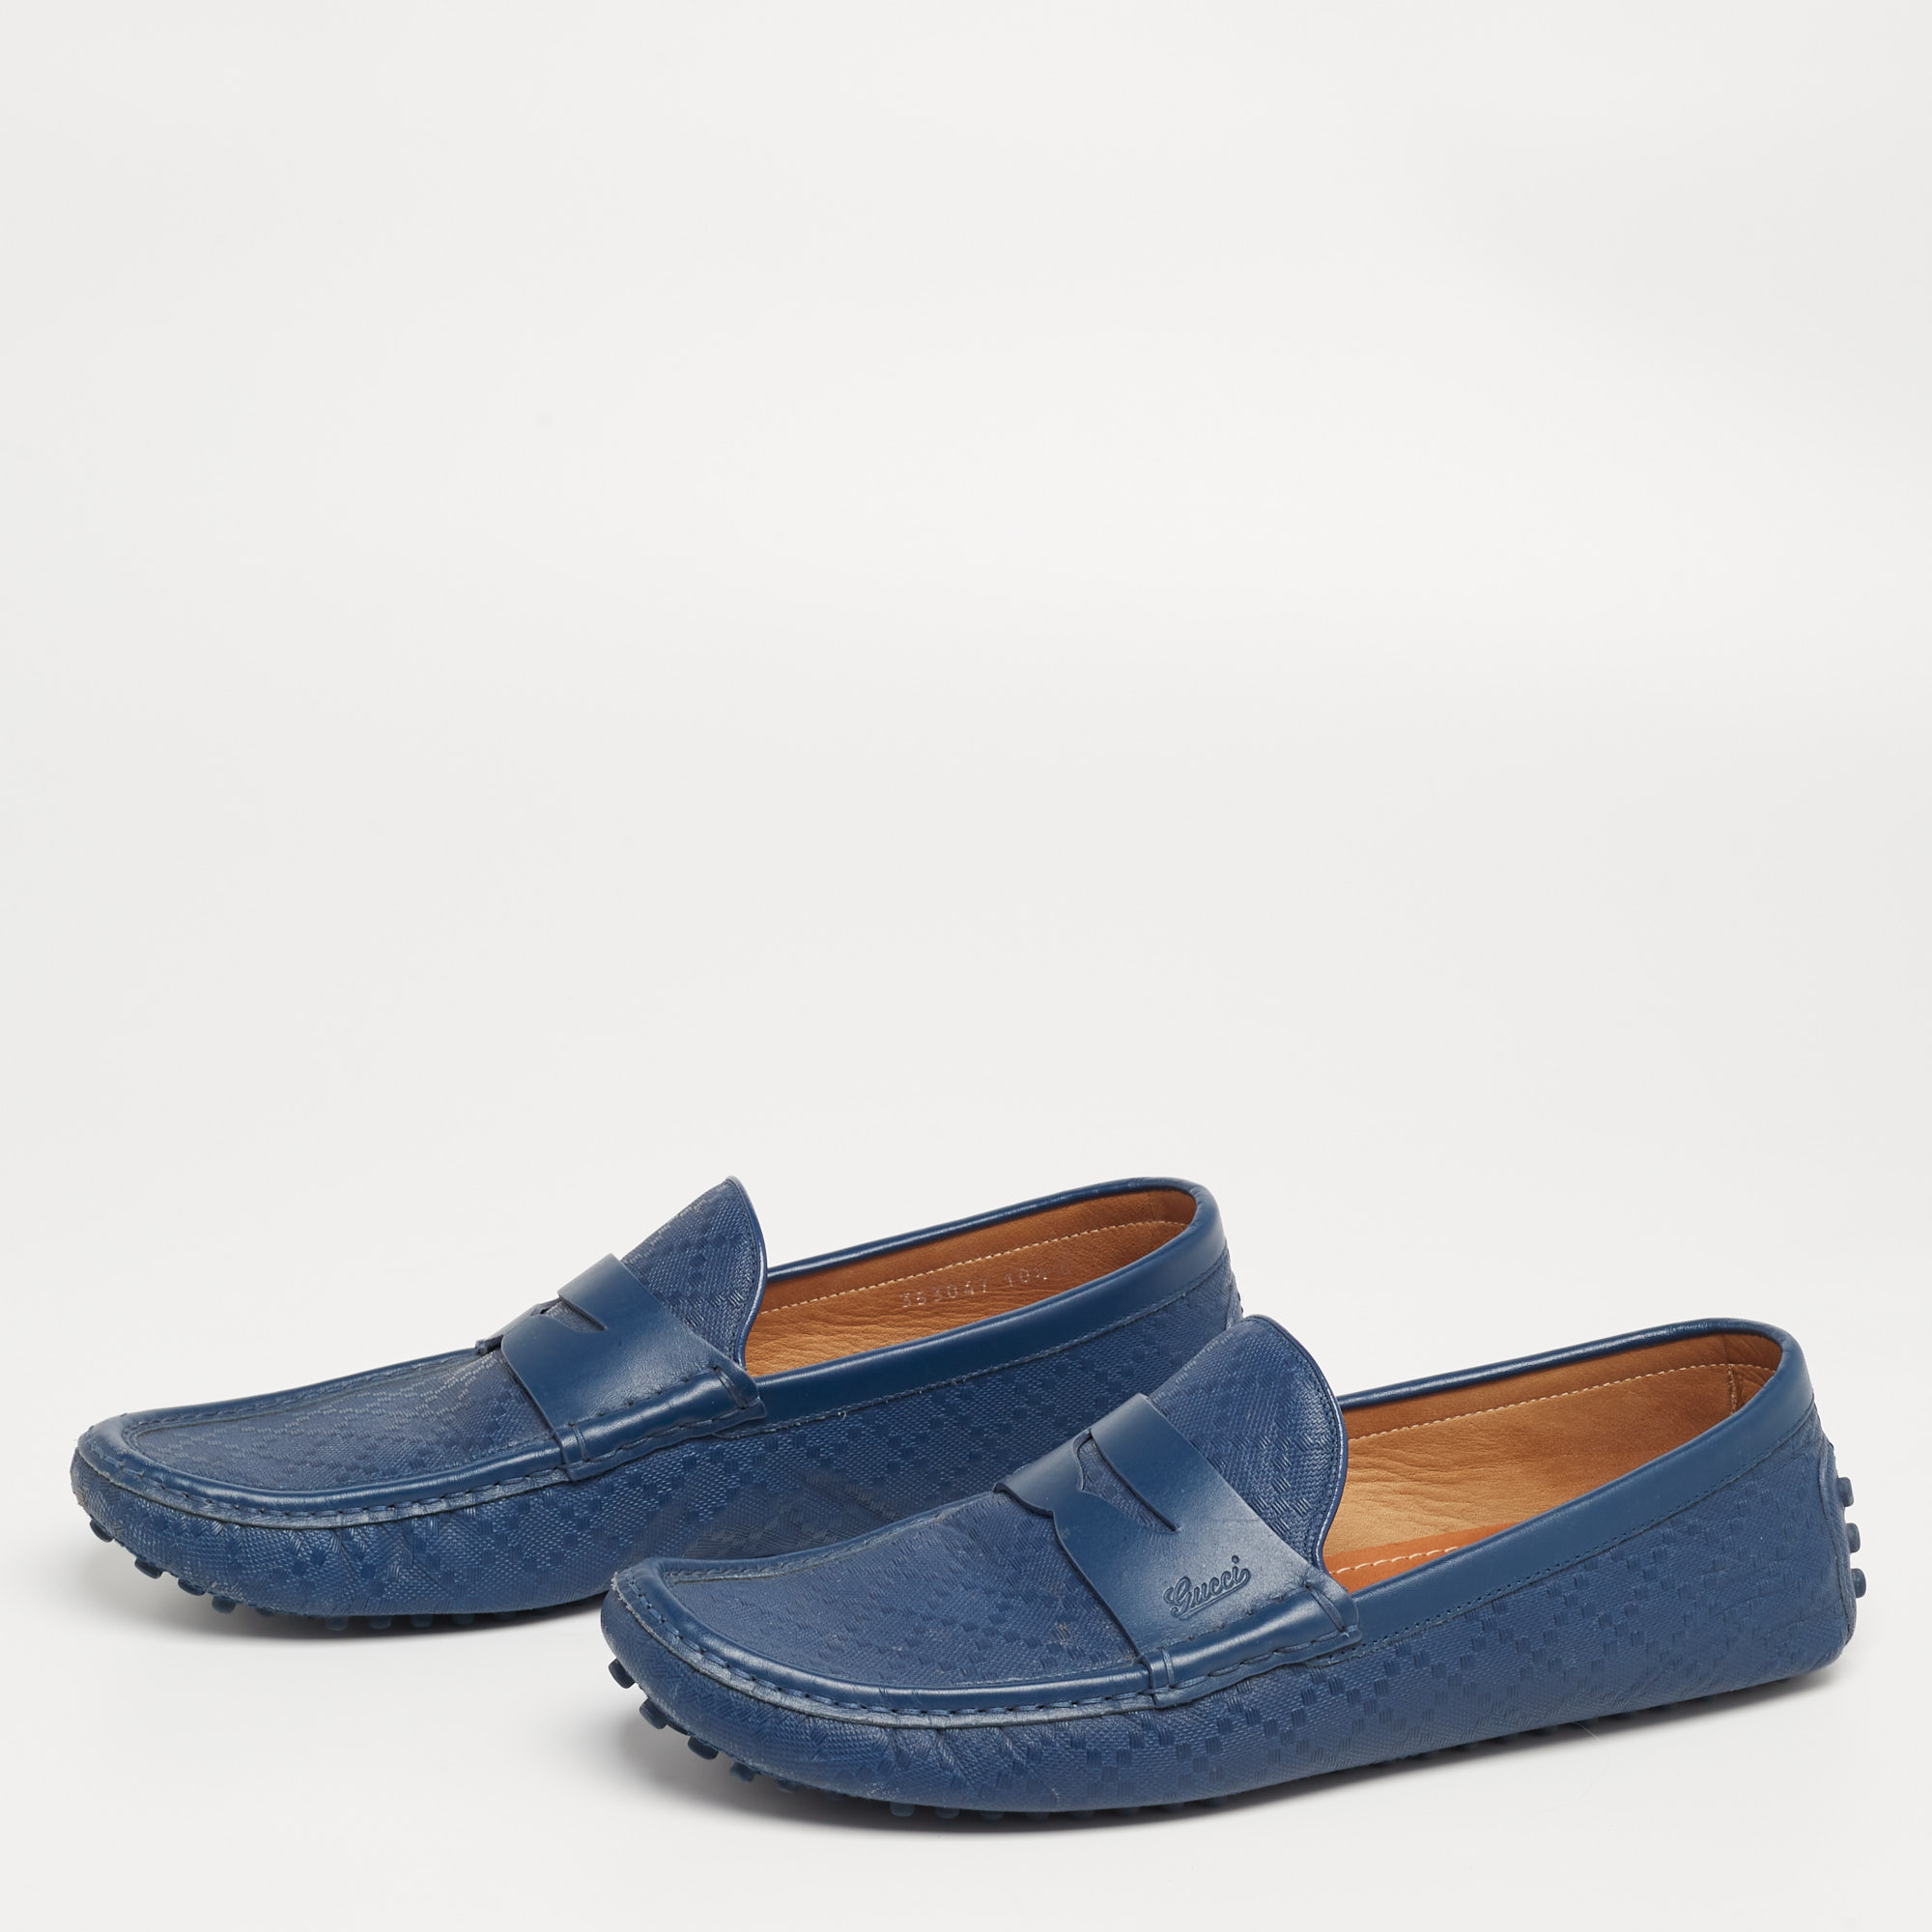 

Gucci Blue Diamante Leather Penny Loafers Size